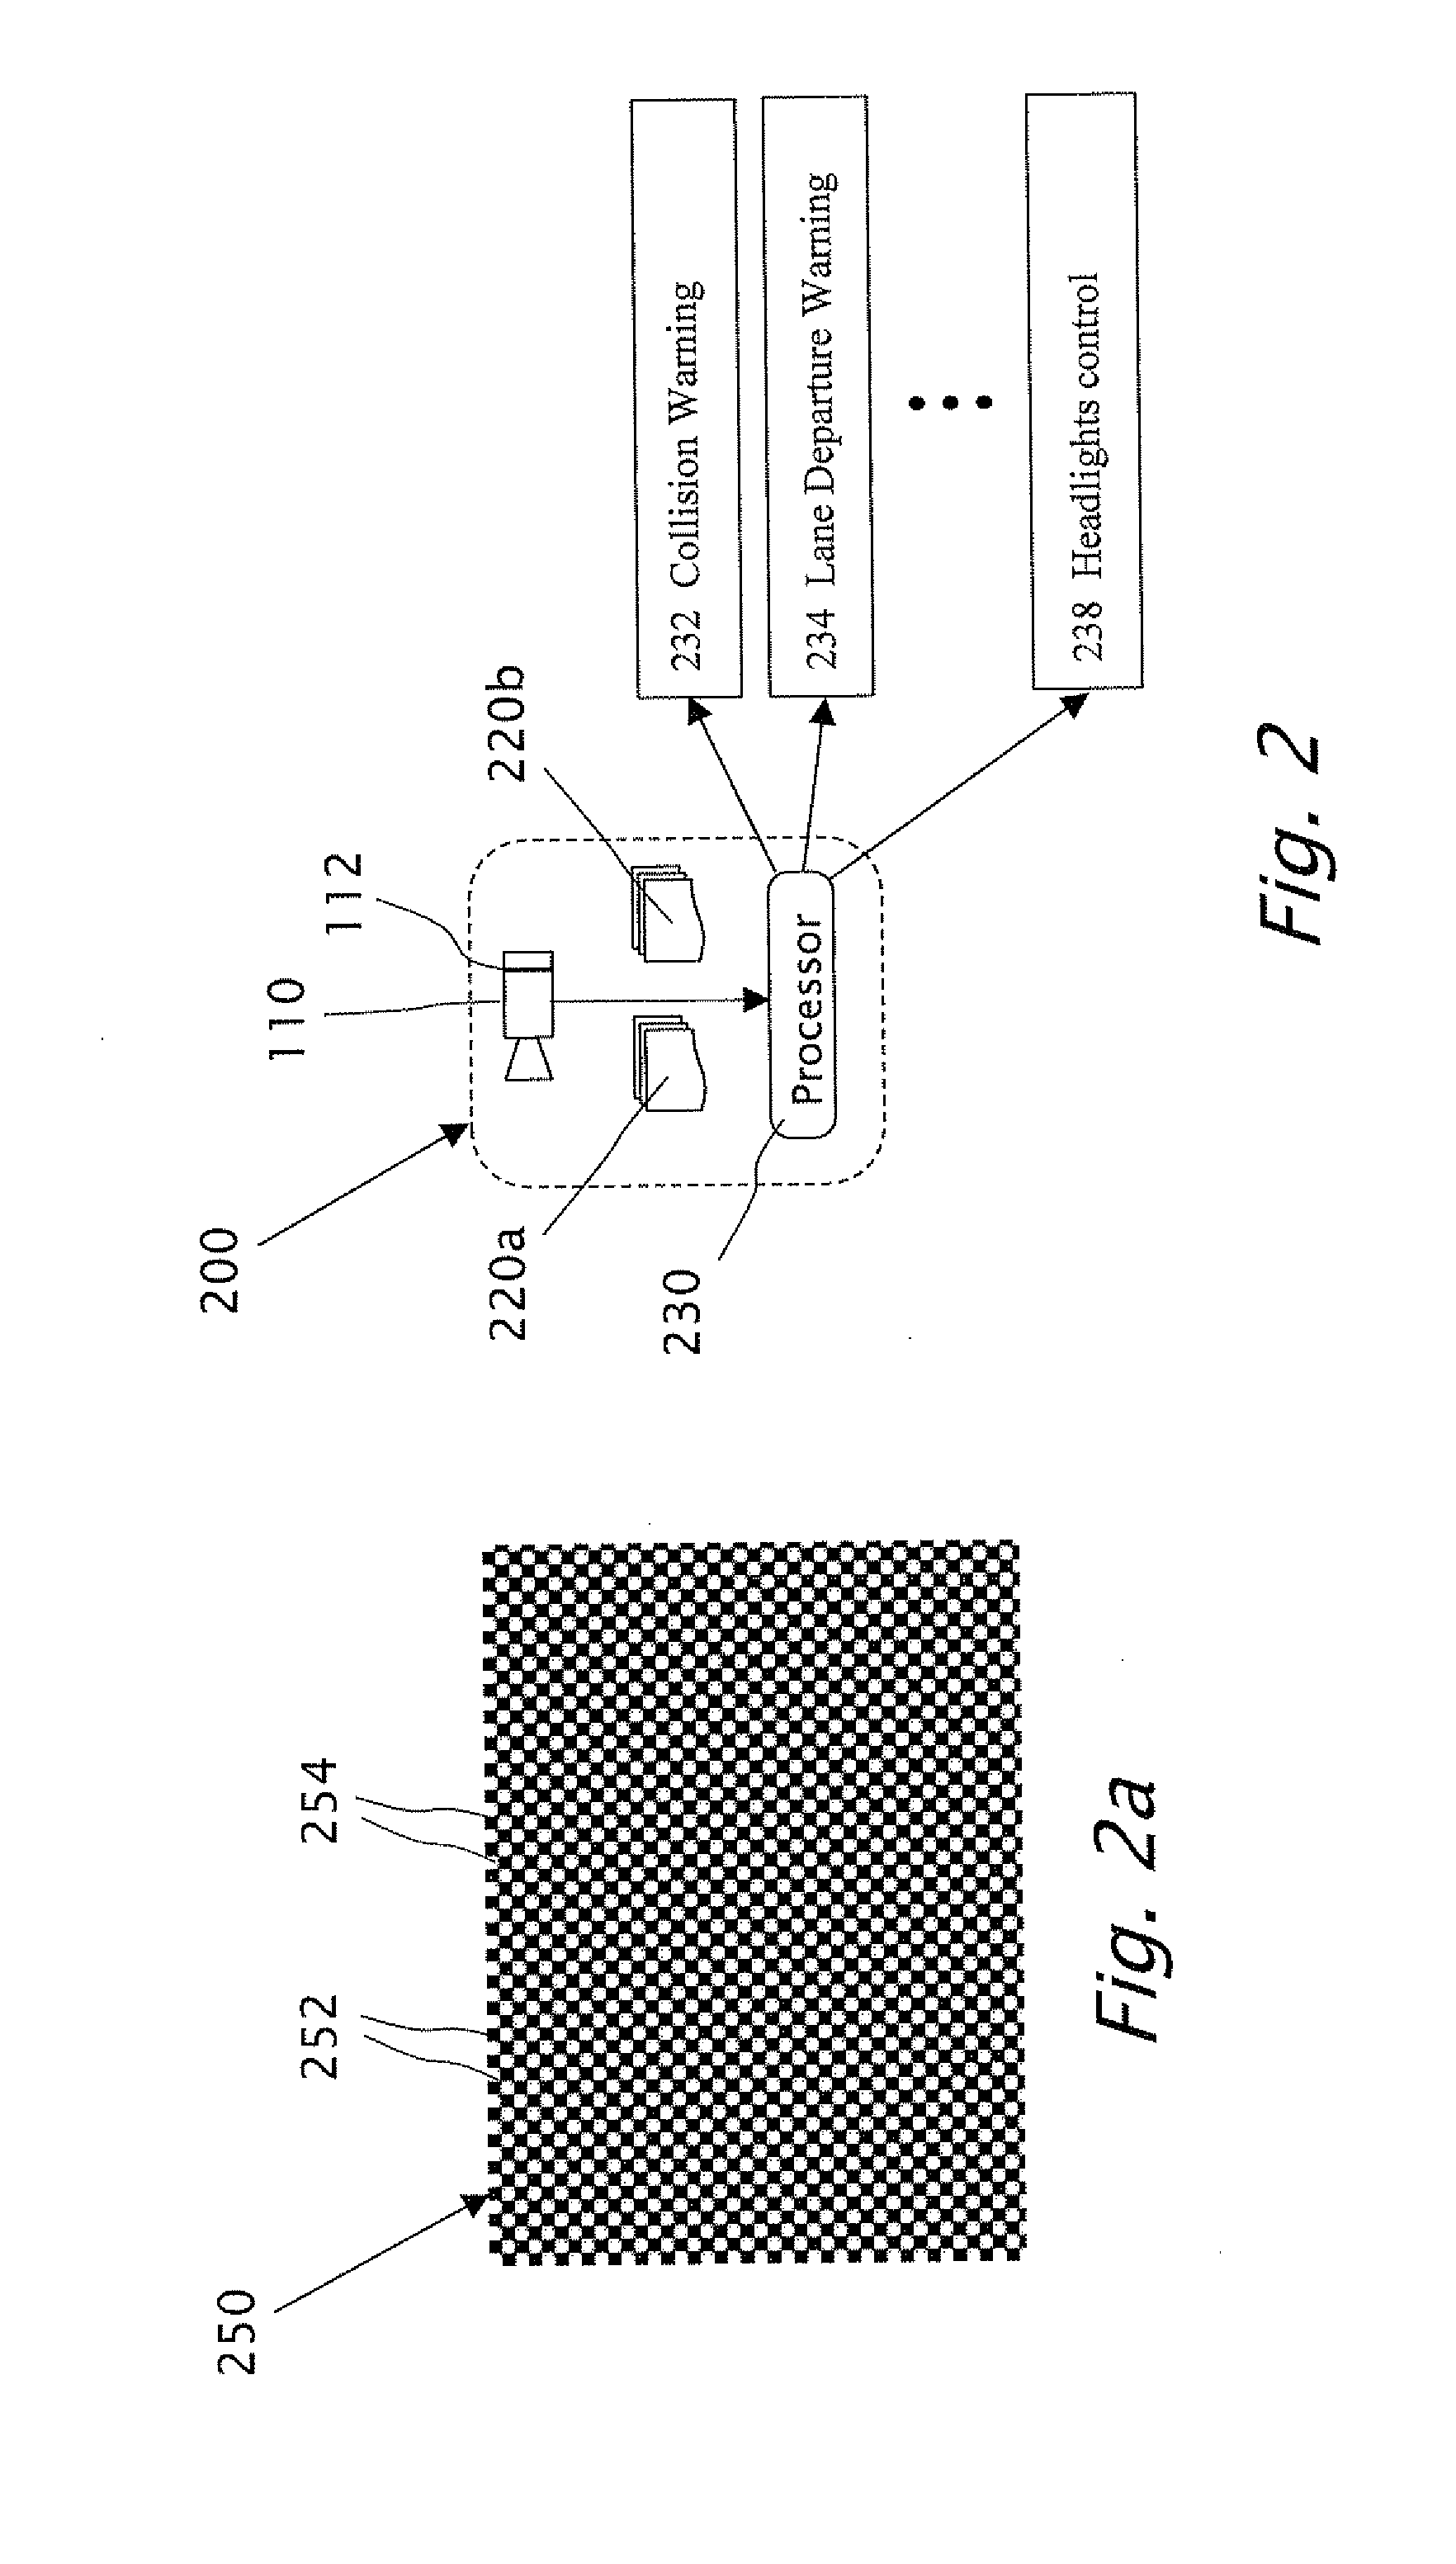 Symmetric filter patterns for enhanced performance of single and concurrent driver assistance applications